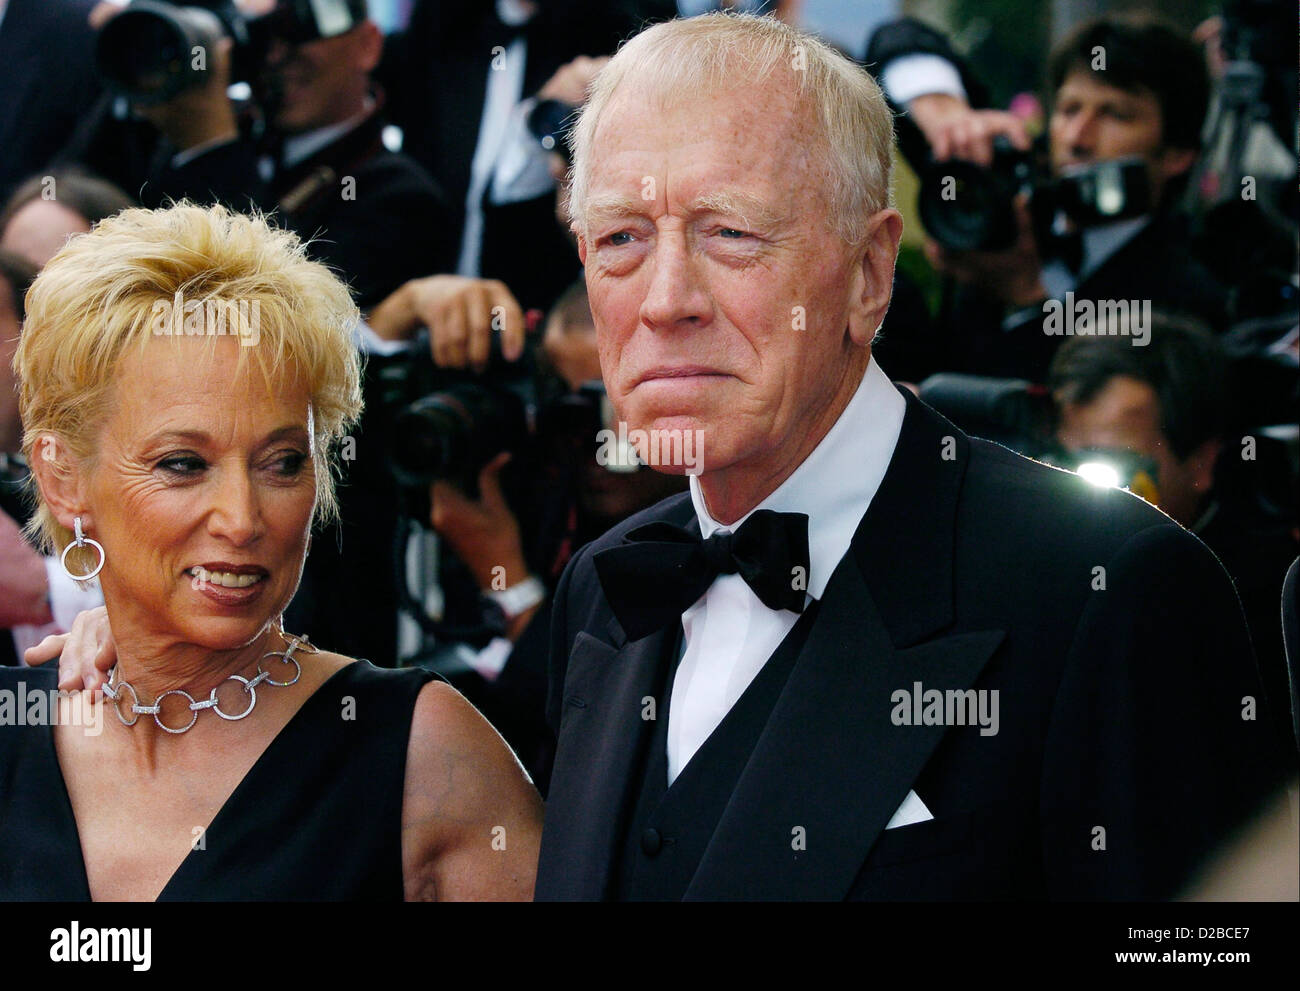 Festival De Cannes the Cannes Film Festival. Pictured on the red carpet for the opening night is Max von Sydow and wife. Stock Photo